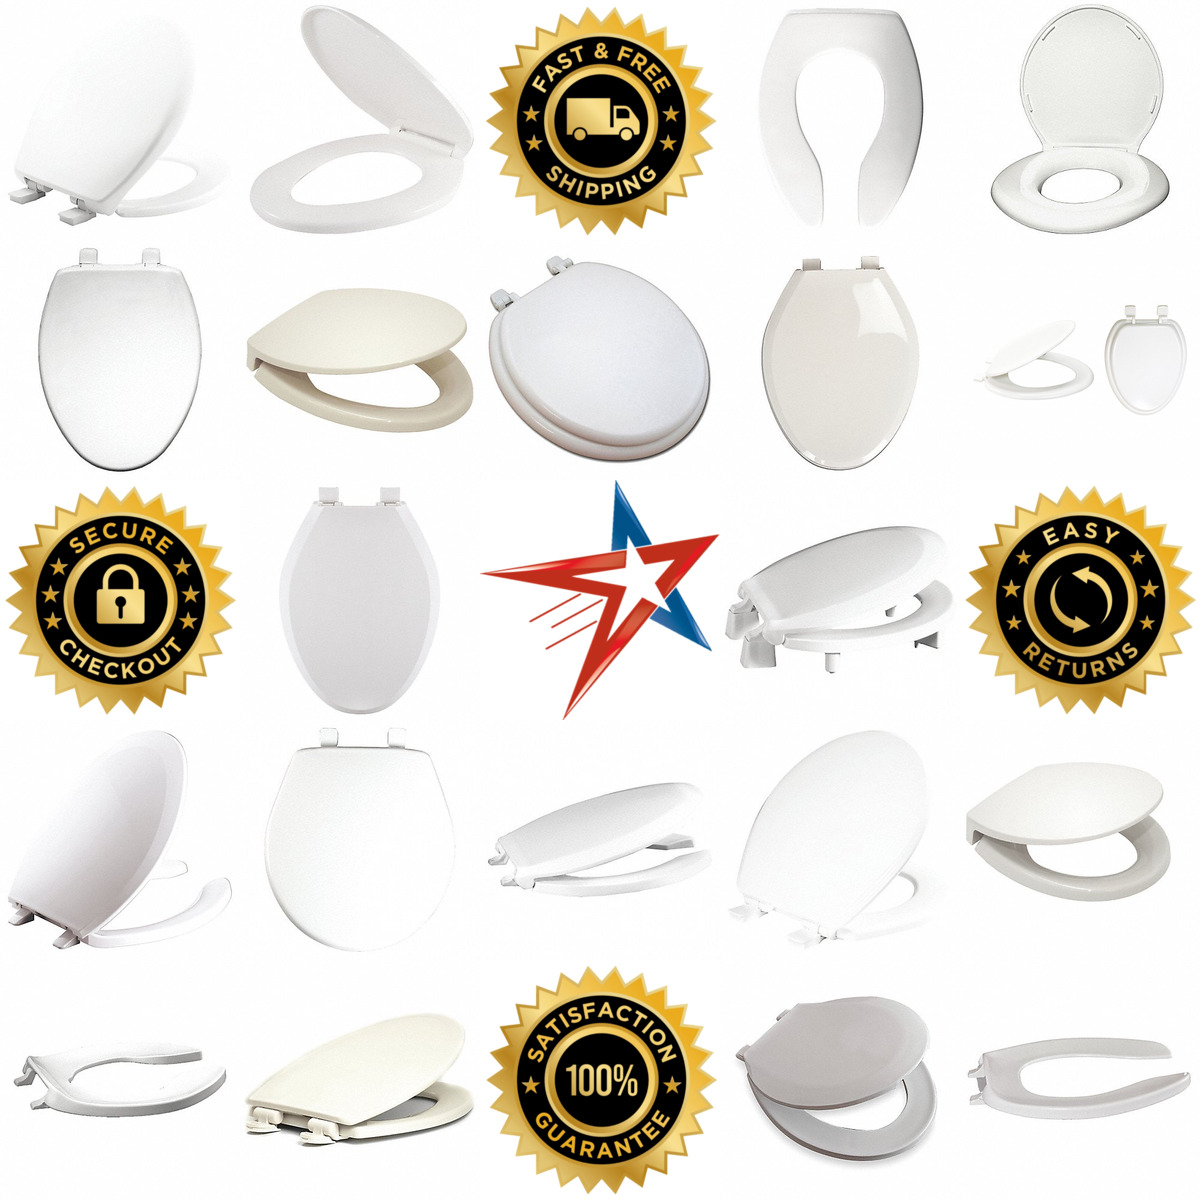 A selection of Toilet Seats products on GoVets